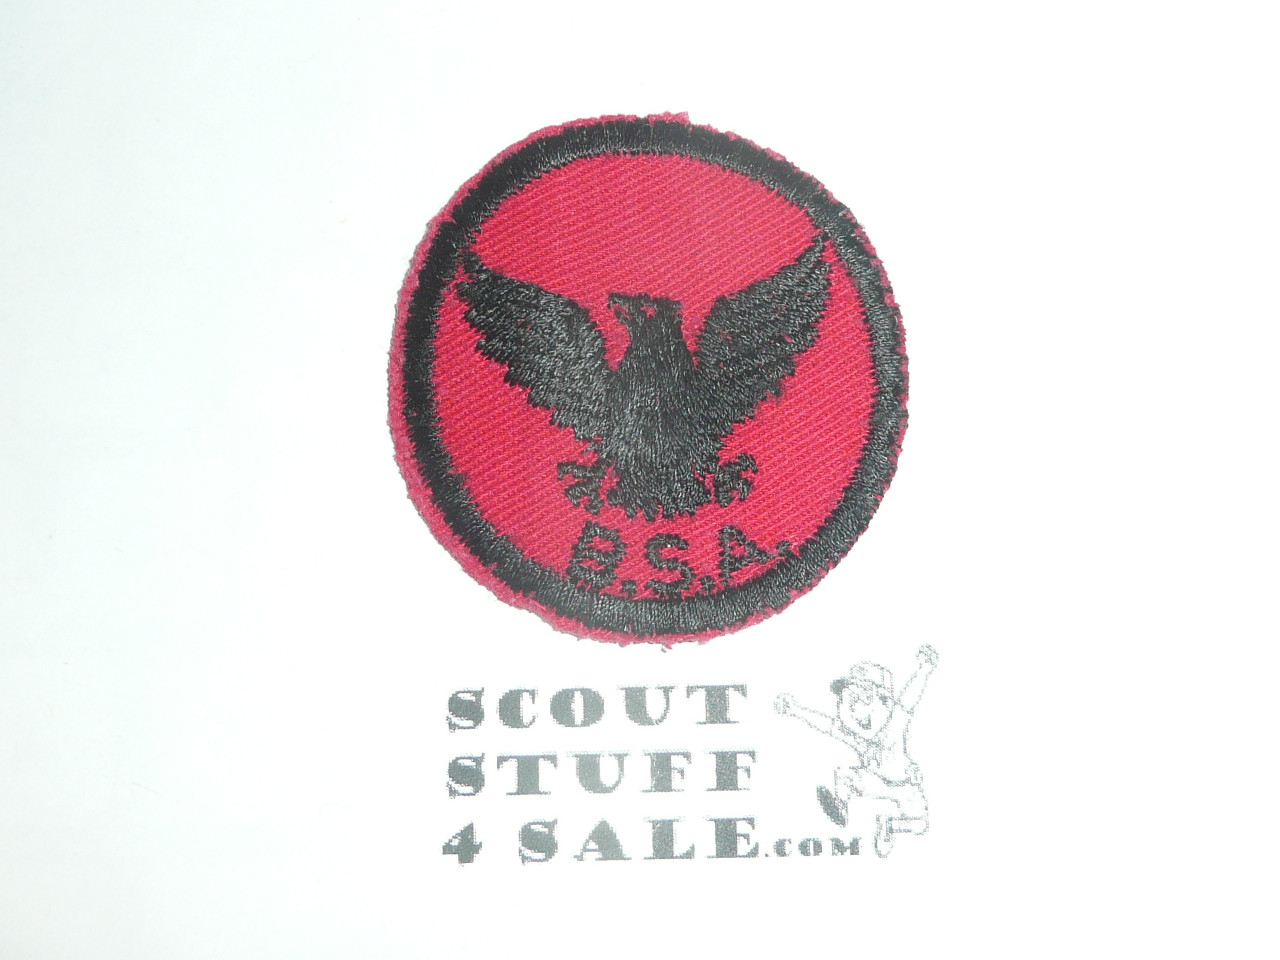 Flying Eagle Patrol Medallion, Red Twill with rubber back, 1955-1971